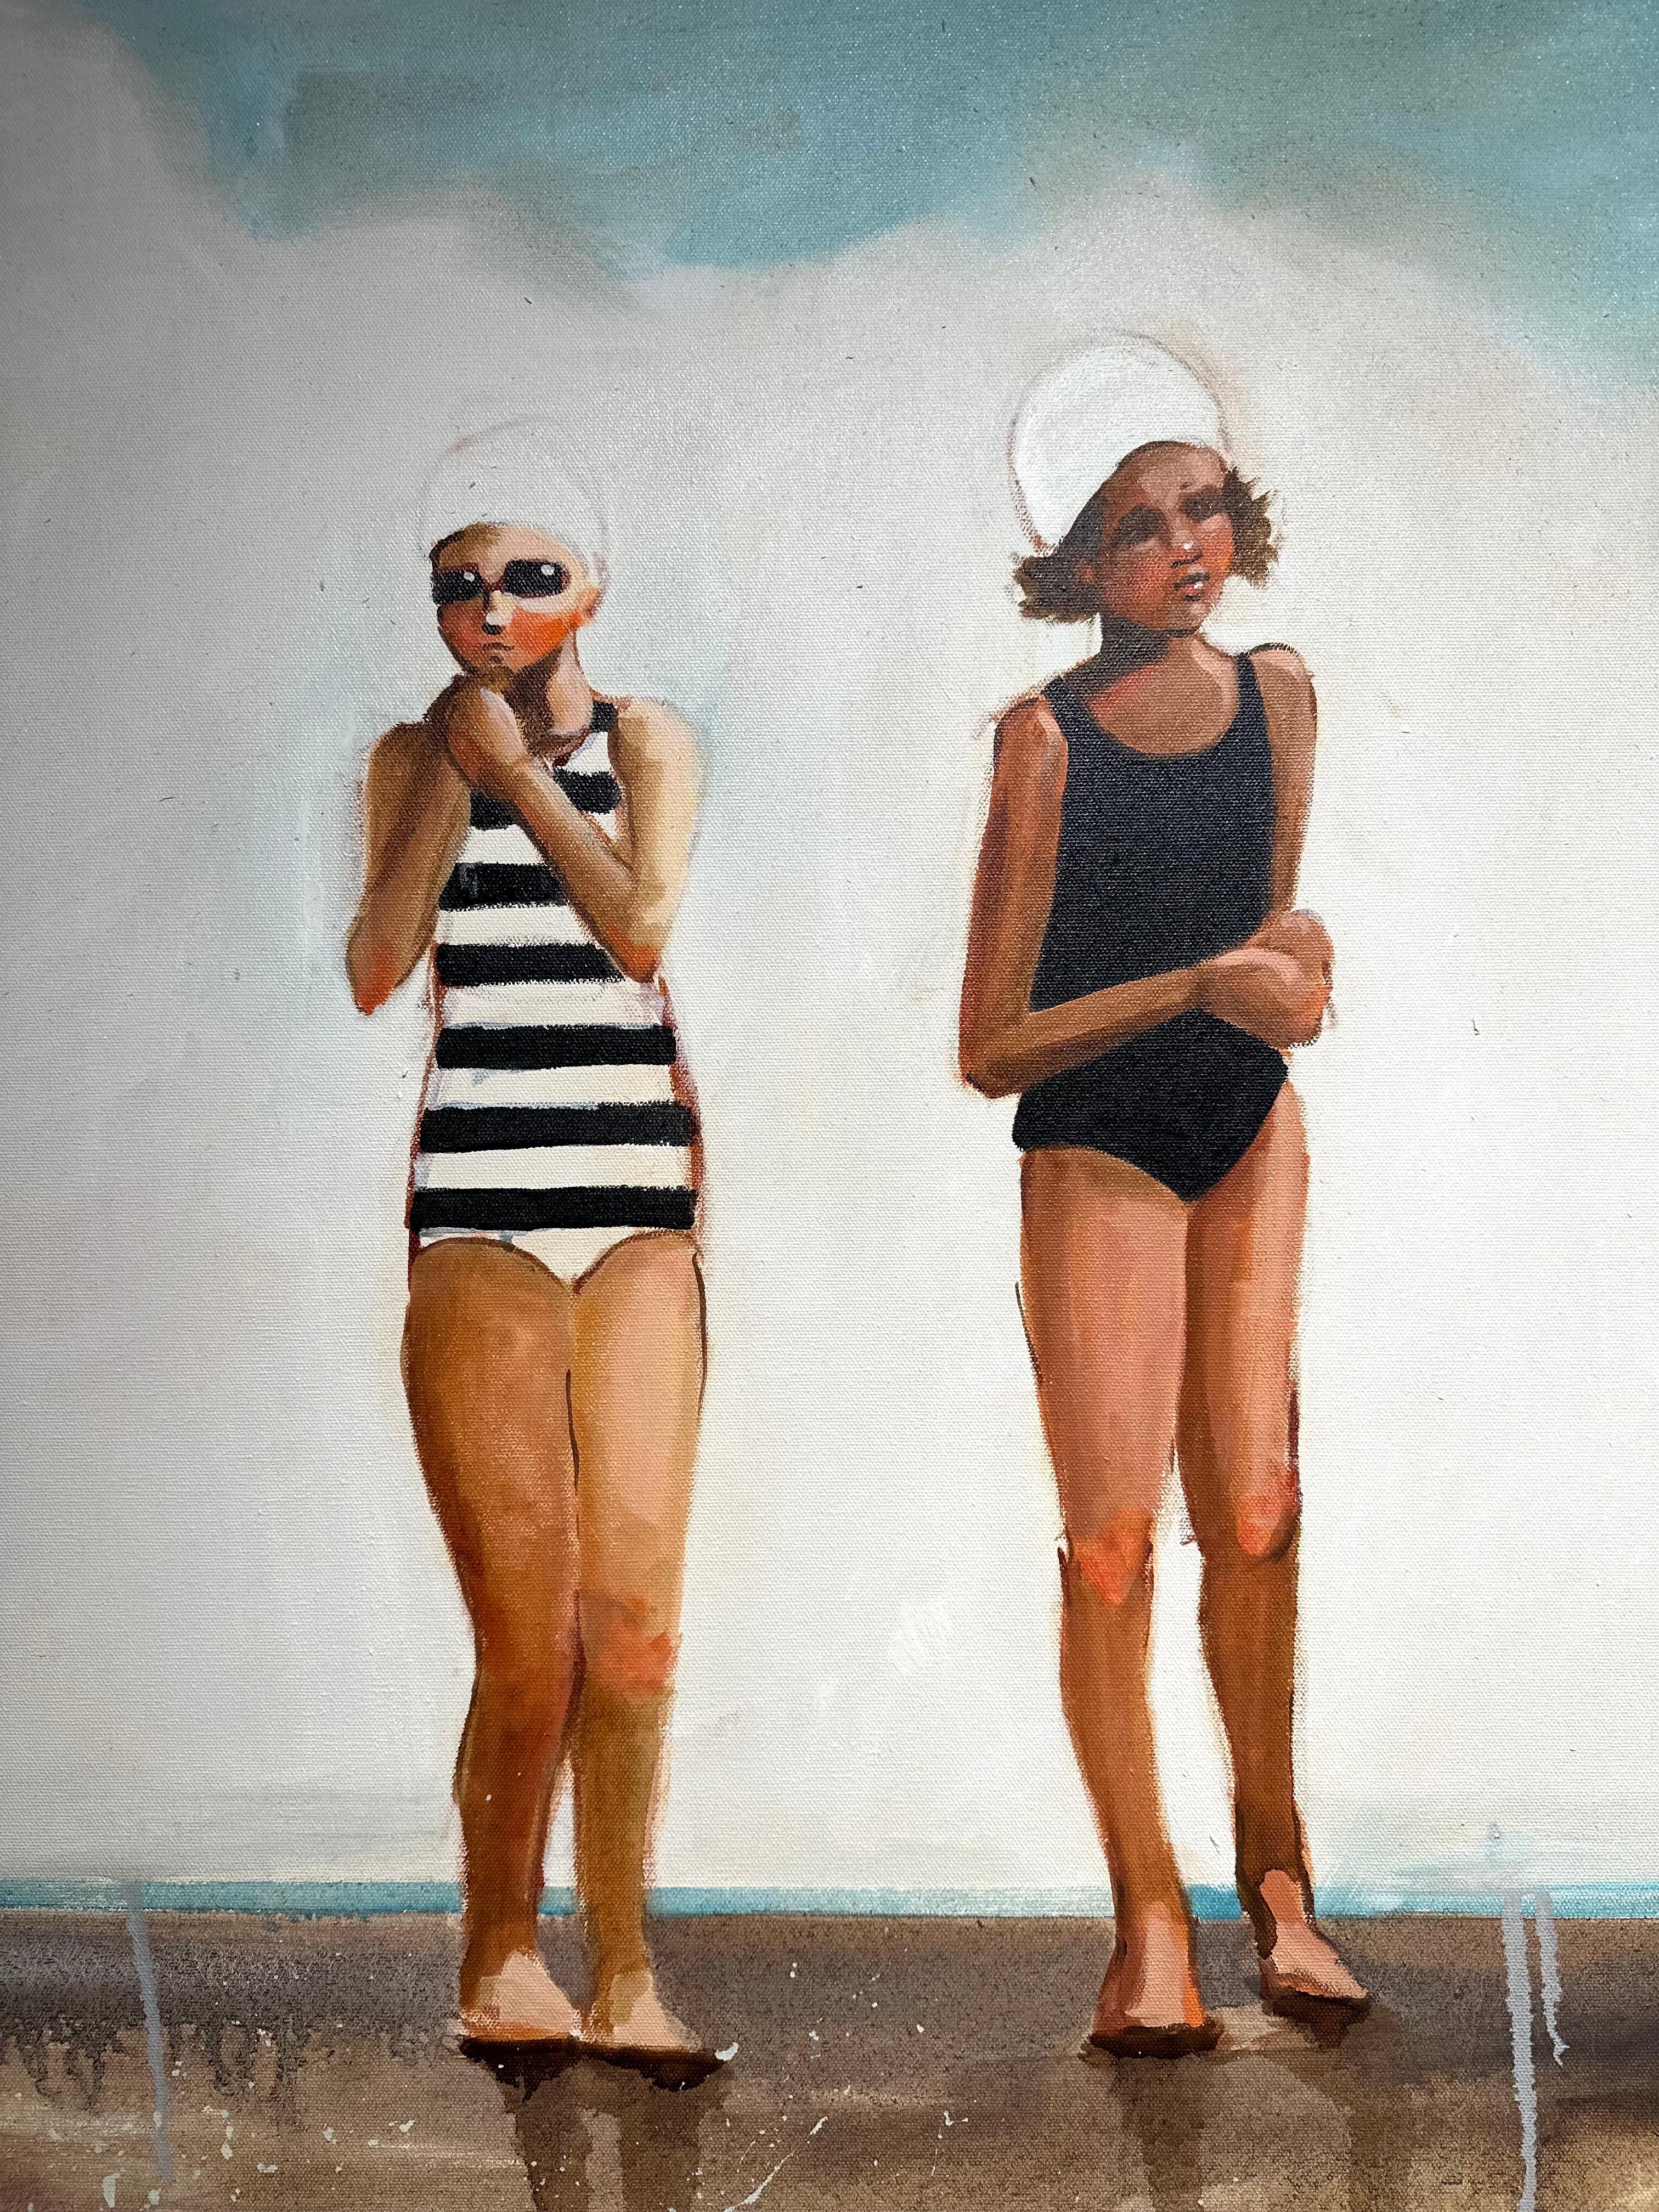 painted bathing suits photos